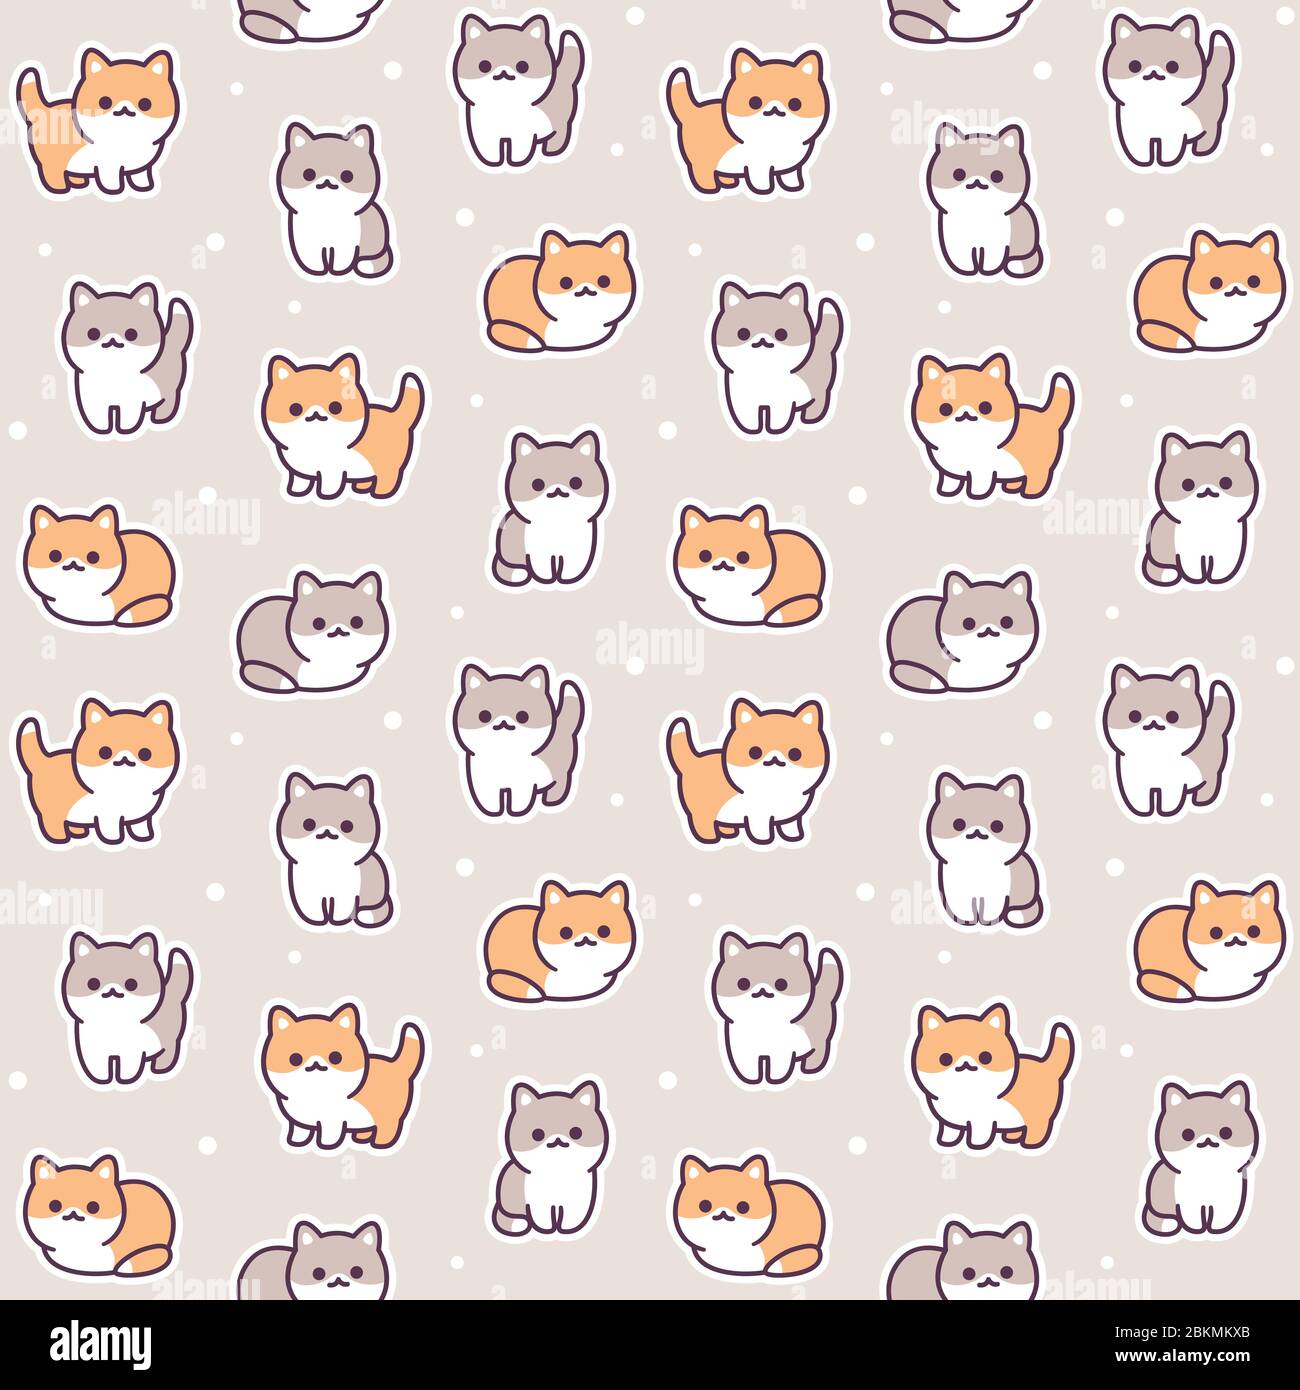 Tiny baby kittens seamless pattern. Adorable little cats background